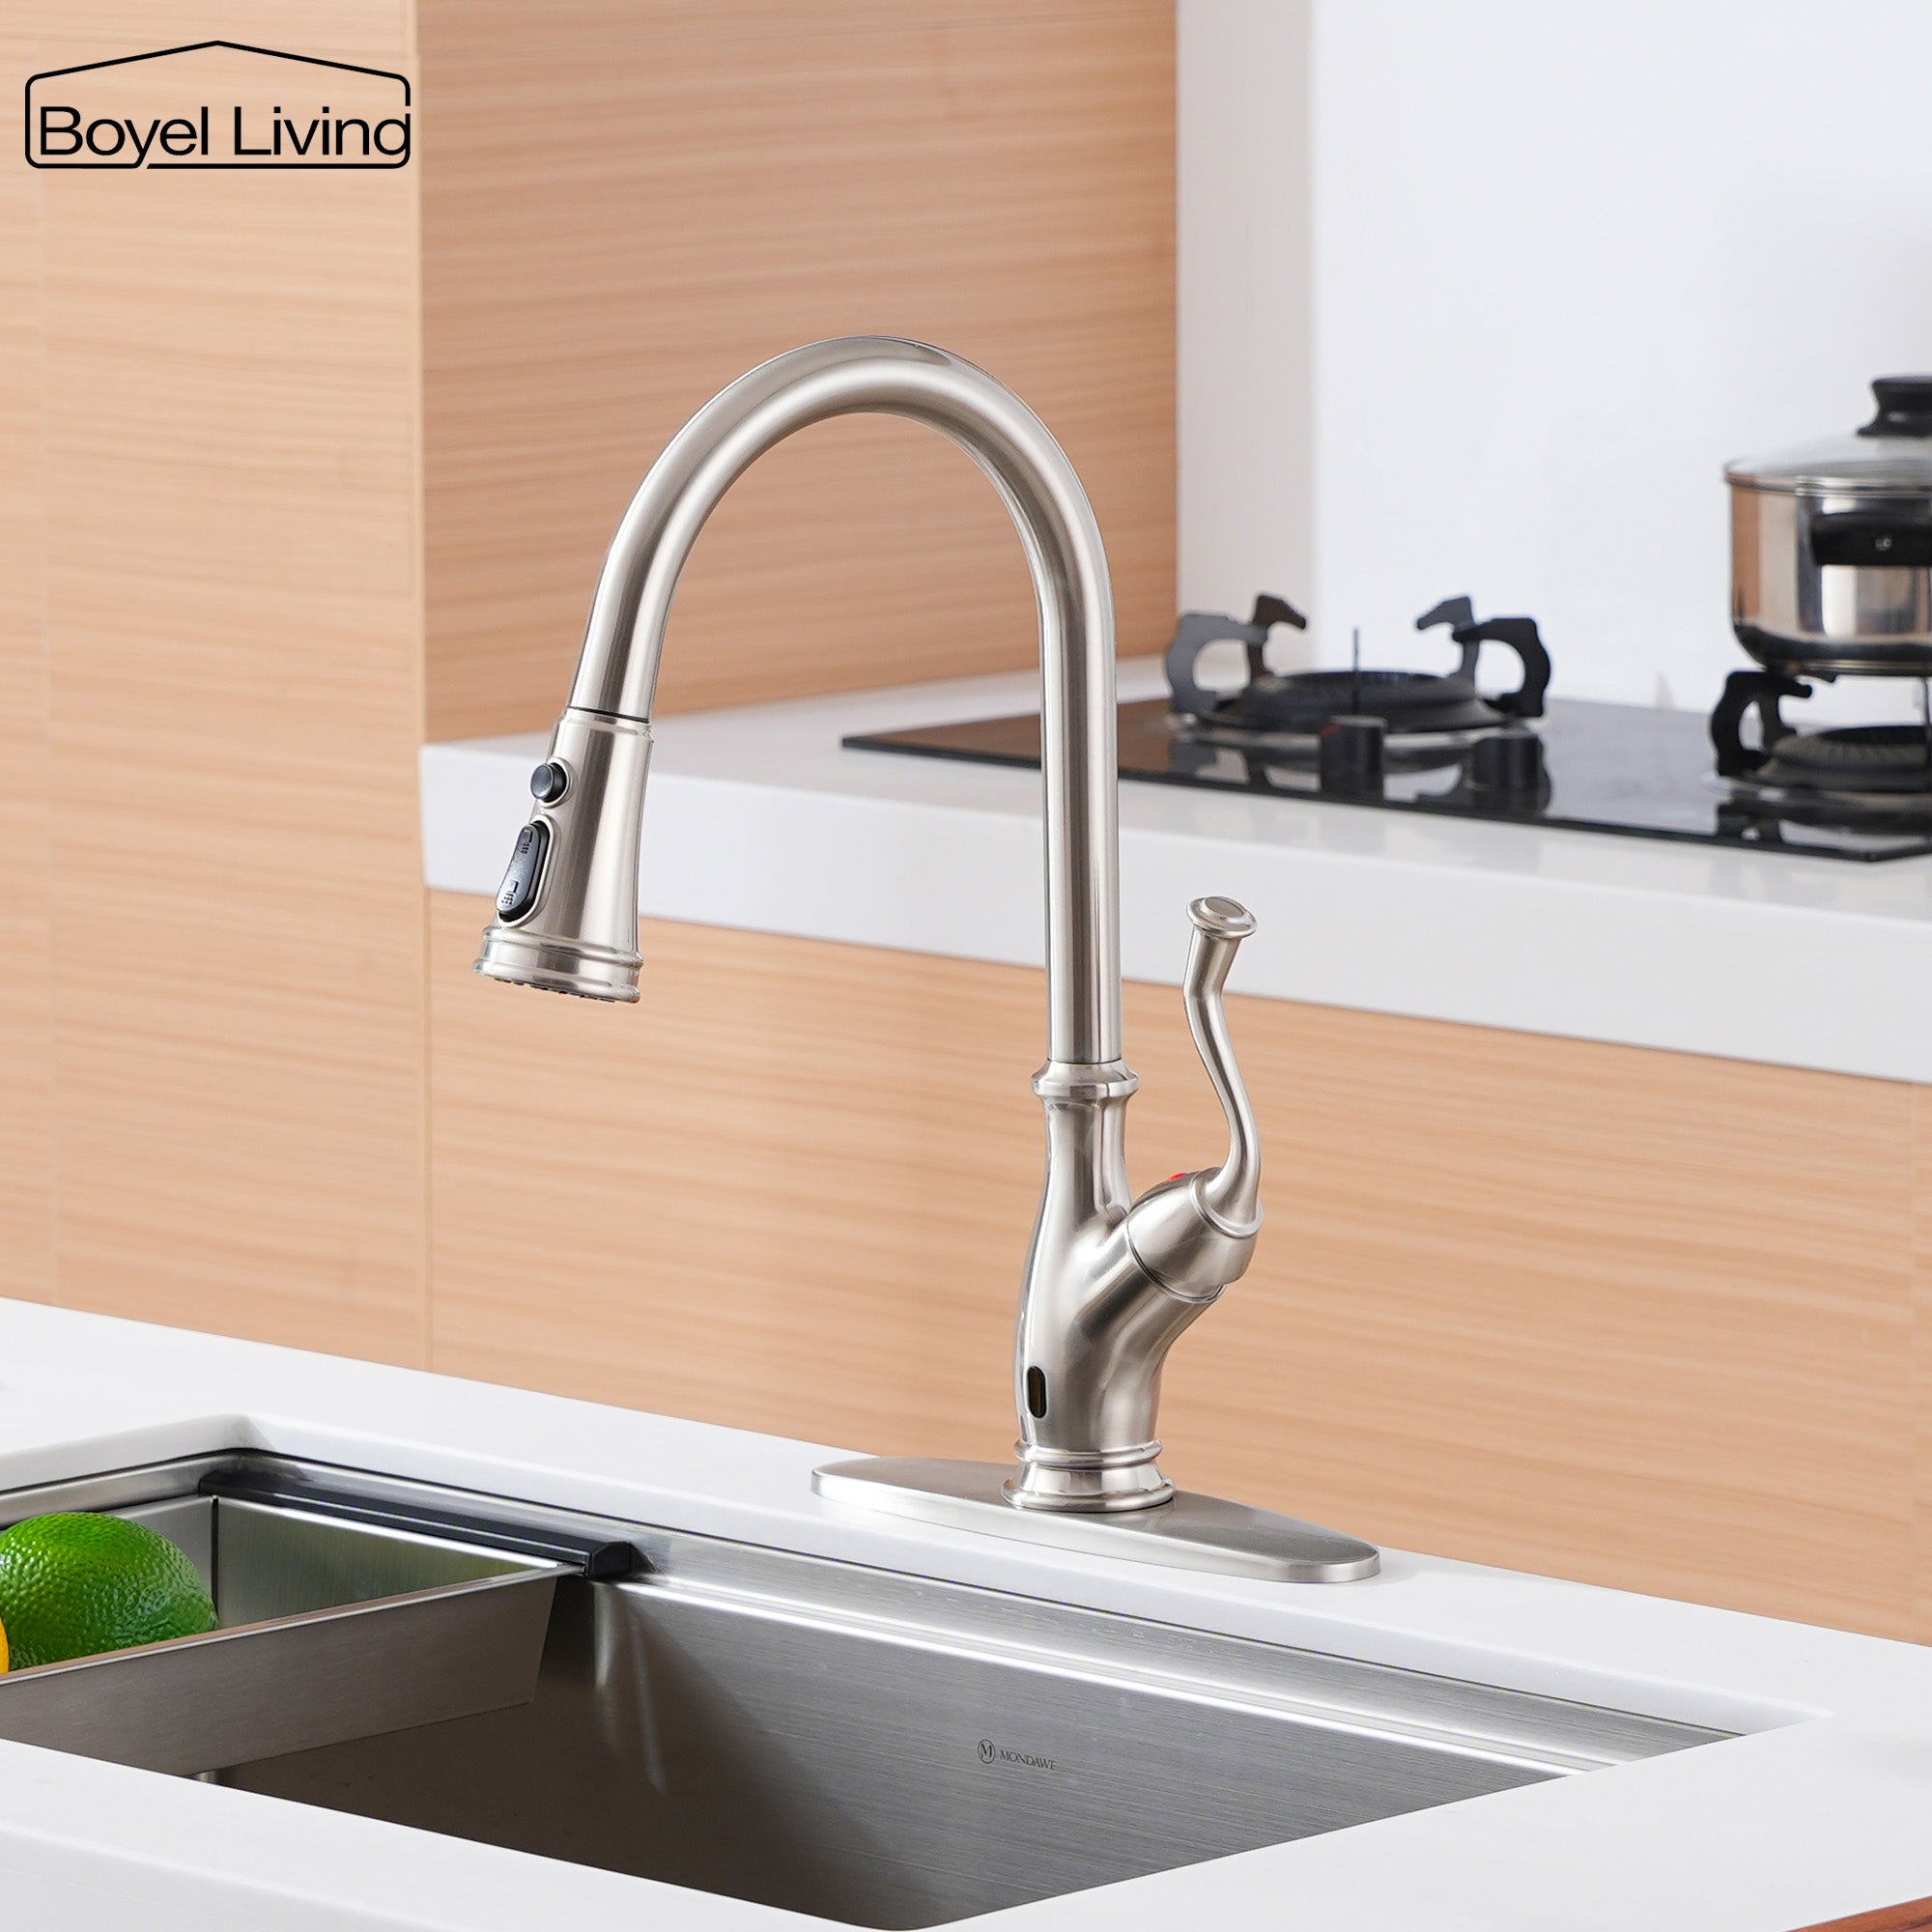 3-Spray Patterns 1.8 GPM Single Handle Touchless Pull Down Sprayer Kitchen Faucet in Brushed Nickel